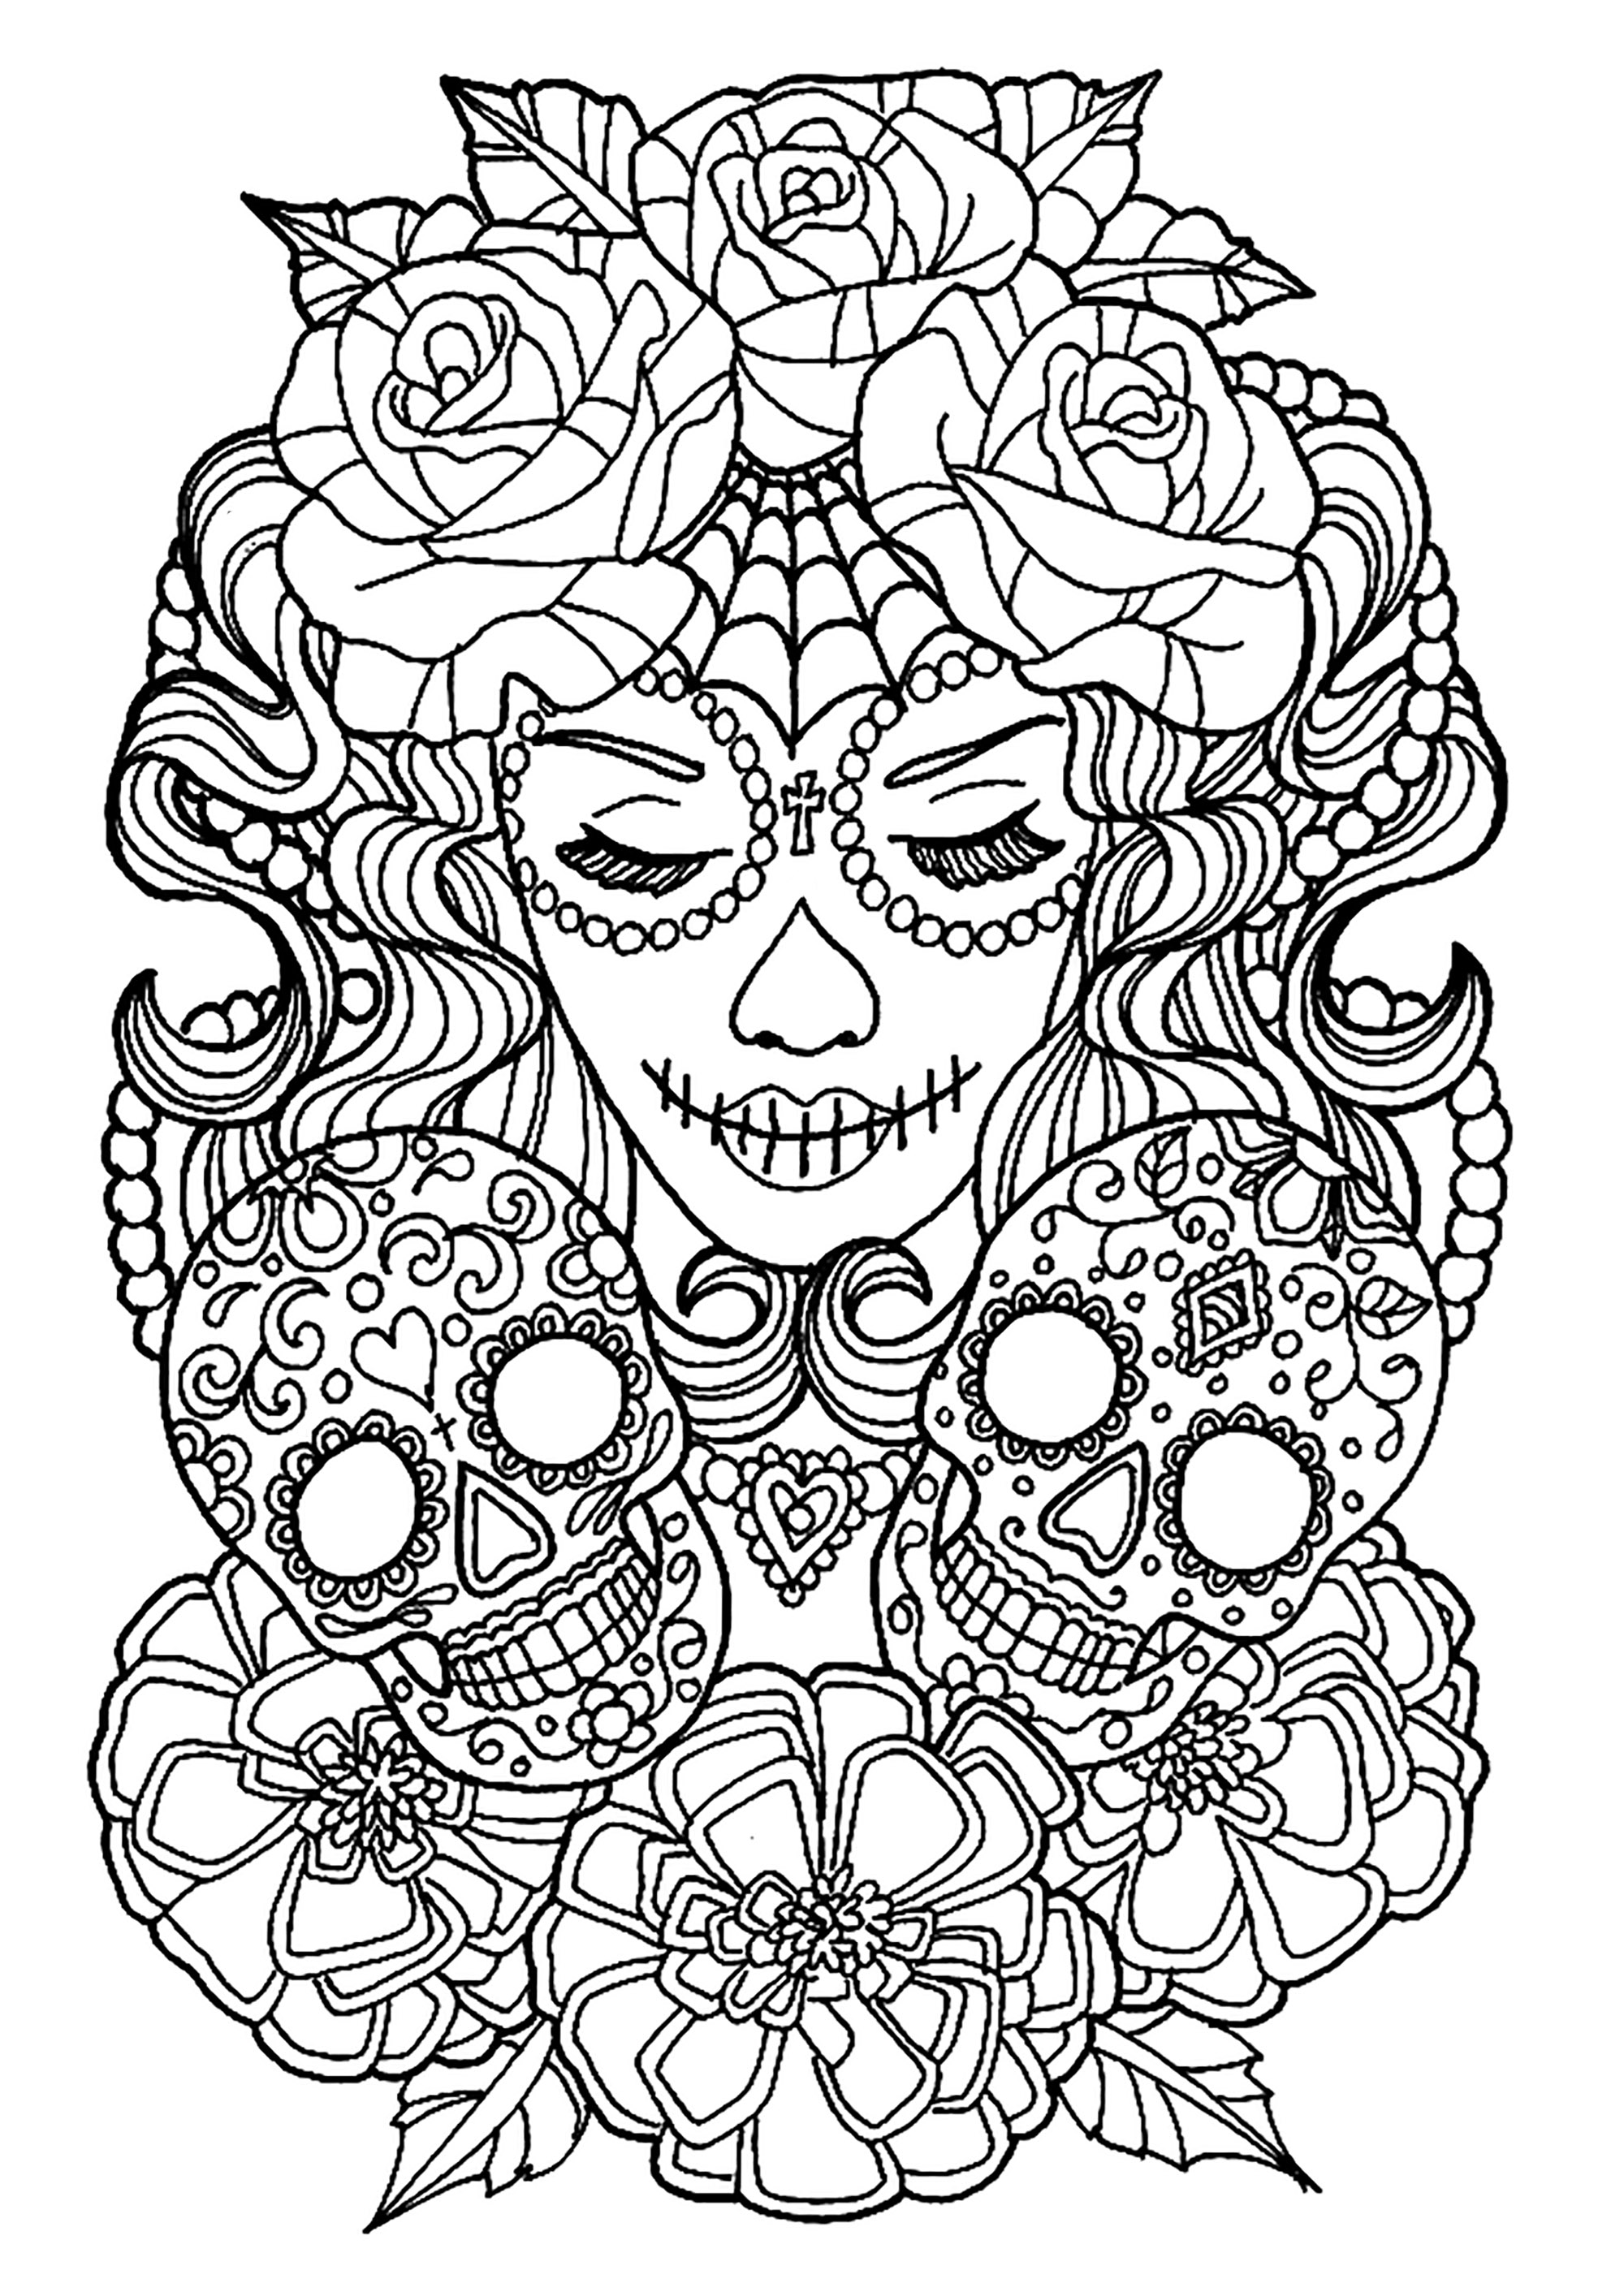 Female figure with closed eyes, skulls and flowers. The skulls and flowers are harmoniously arranged, creating a highly aesthetic effect.The female figure is depicted with a calm, serene expression, adding a touch of softness to the whole.